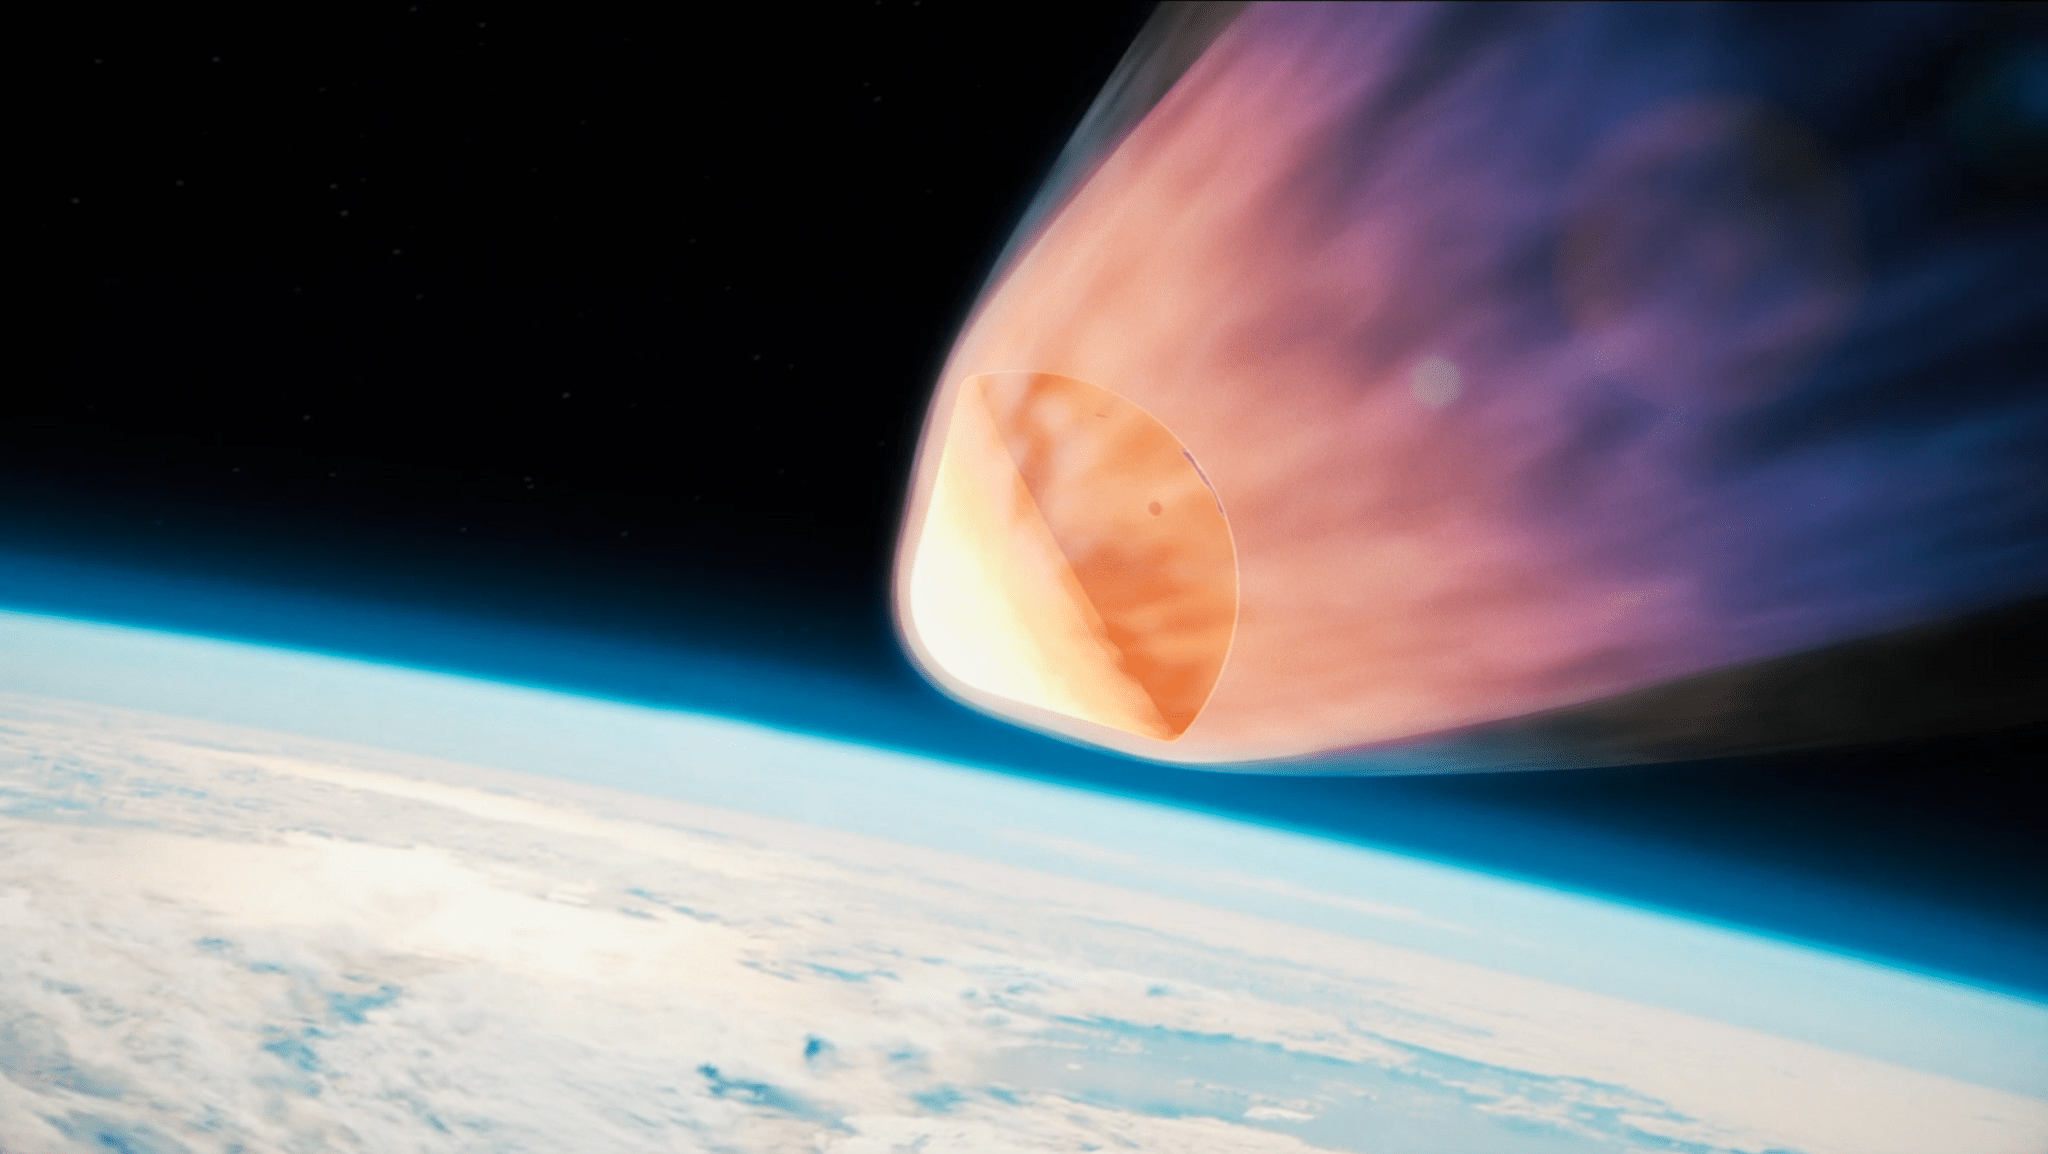 Orange fire surrounds a top-shaped capsule plunging toward Earth, with flames streaming out behind it into the blackness of space. A cloud-covered Earth is visible below.